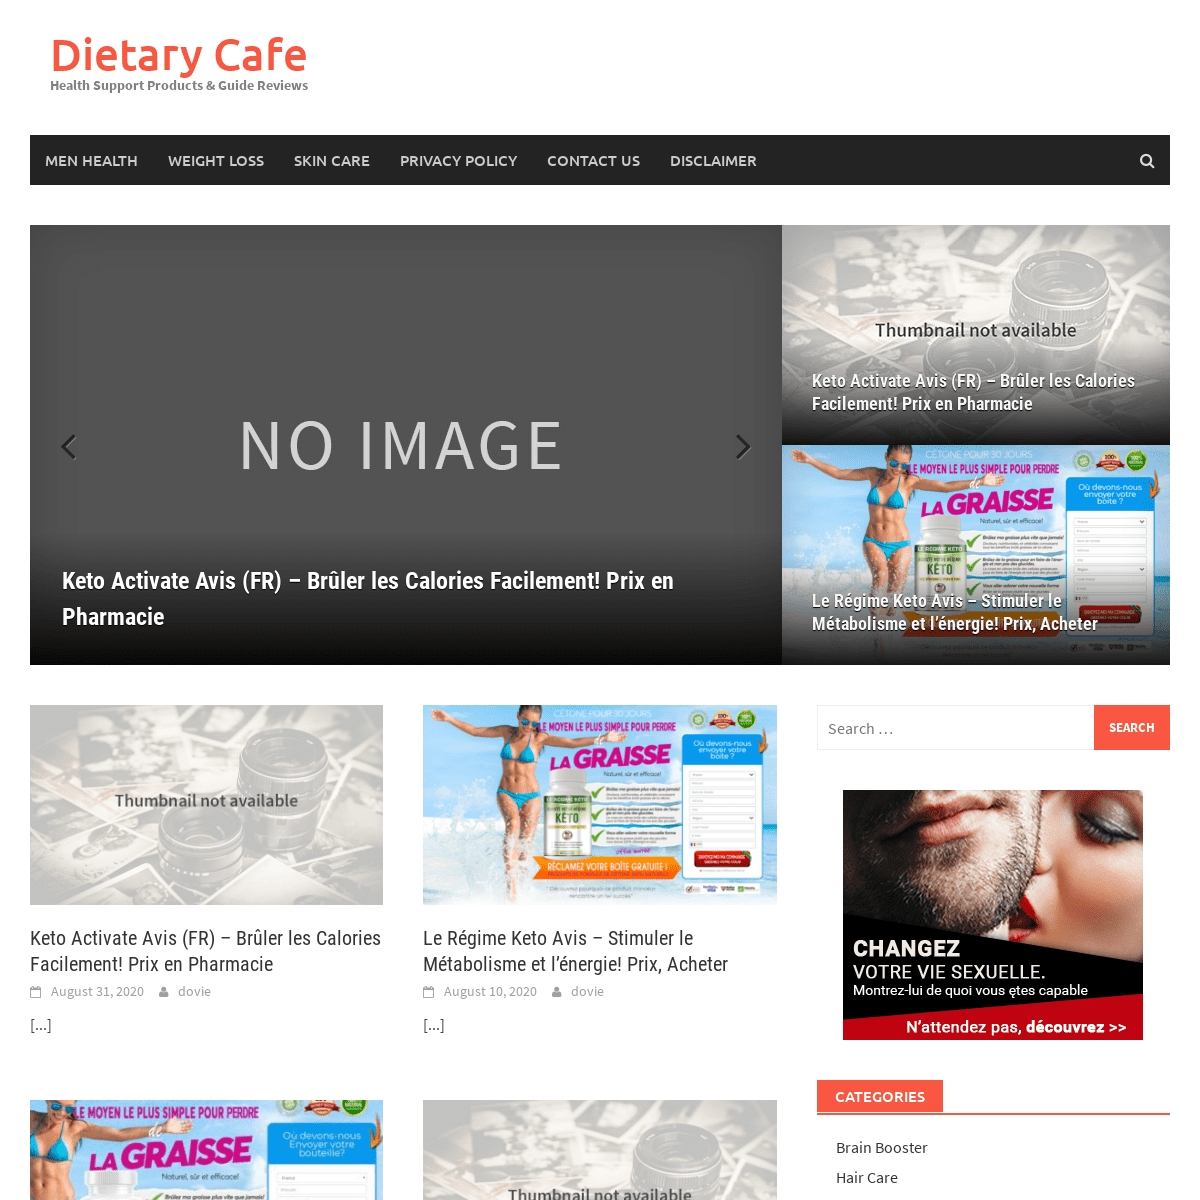 A complete backup of https://dietarycafe.com